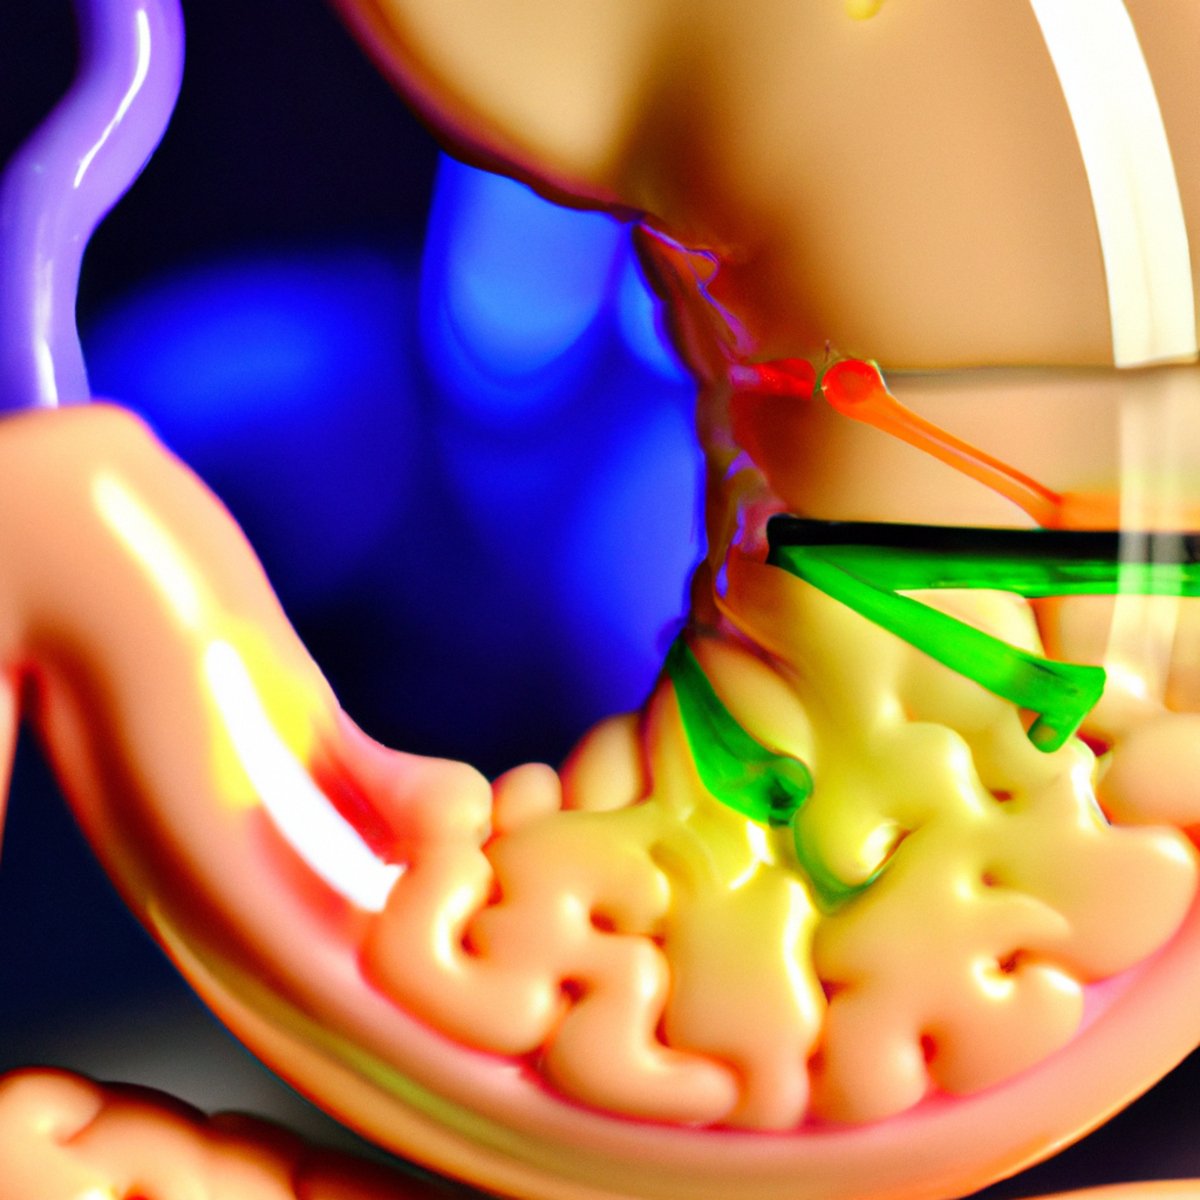 Close-up of human stomach model showcasing abnormal growth of gastric acid-producing cells, surrounded by medical equipment - Zollinger-Ellison syndrome